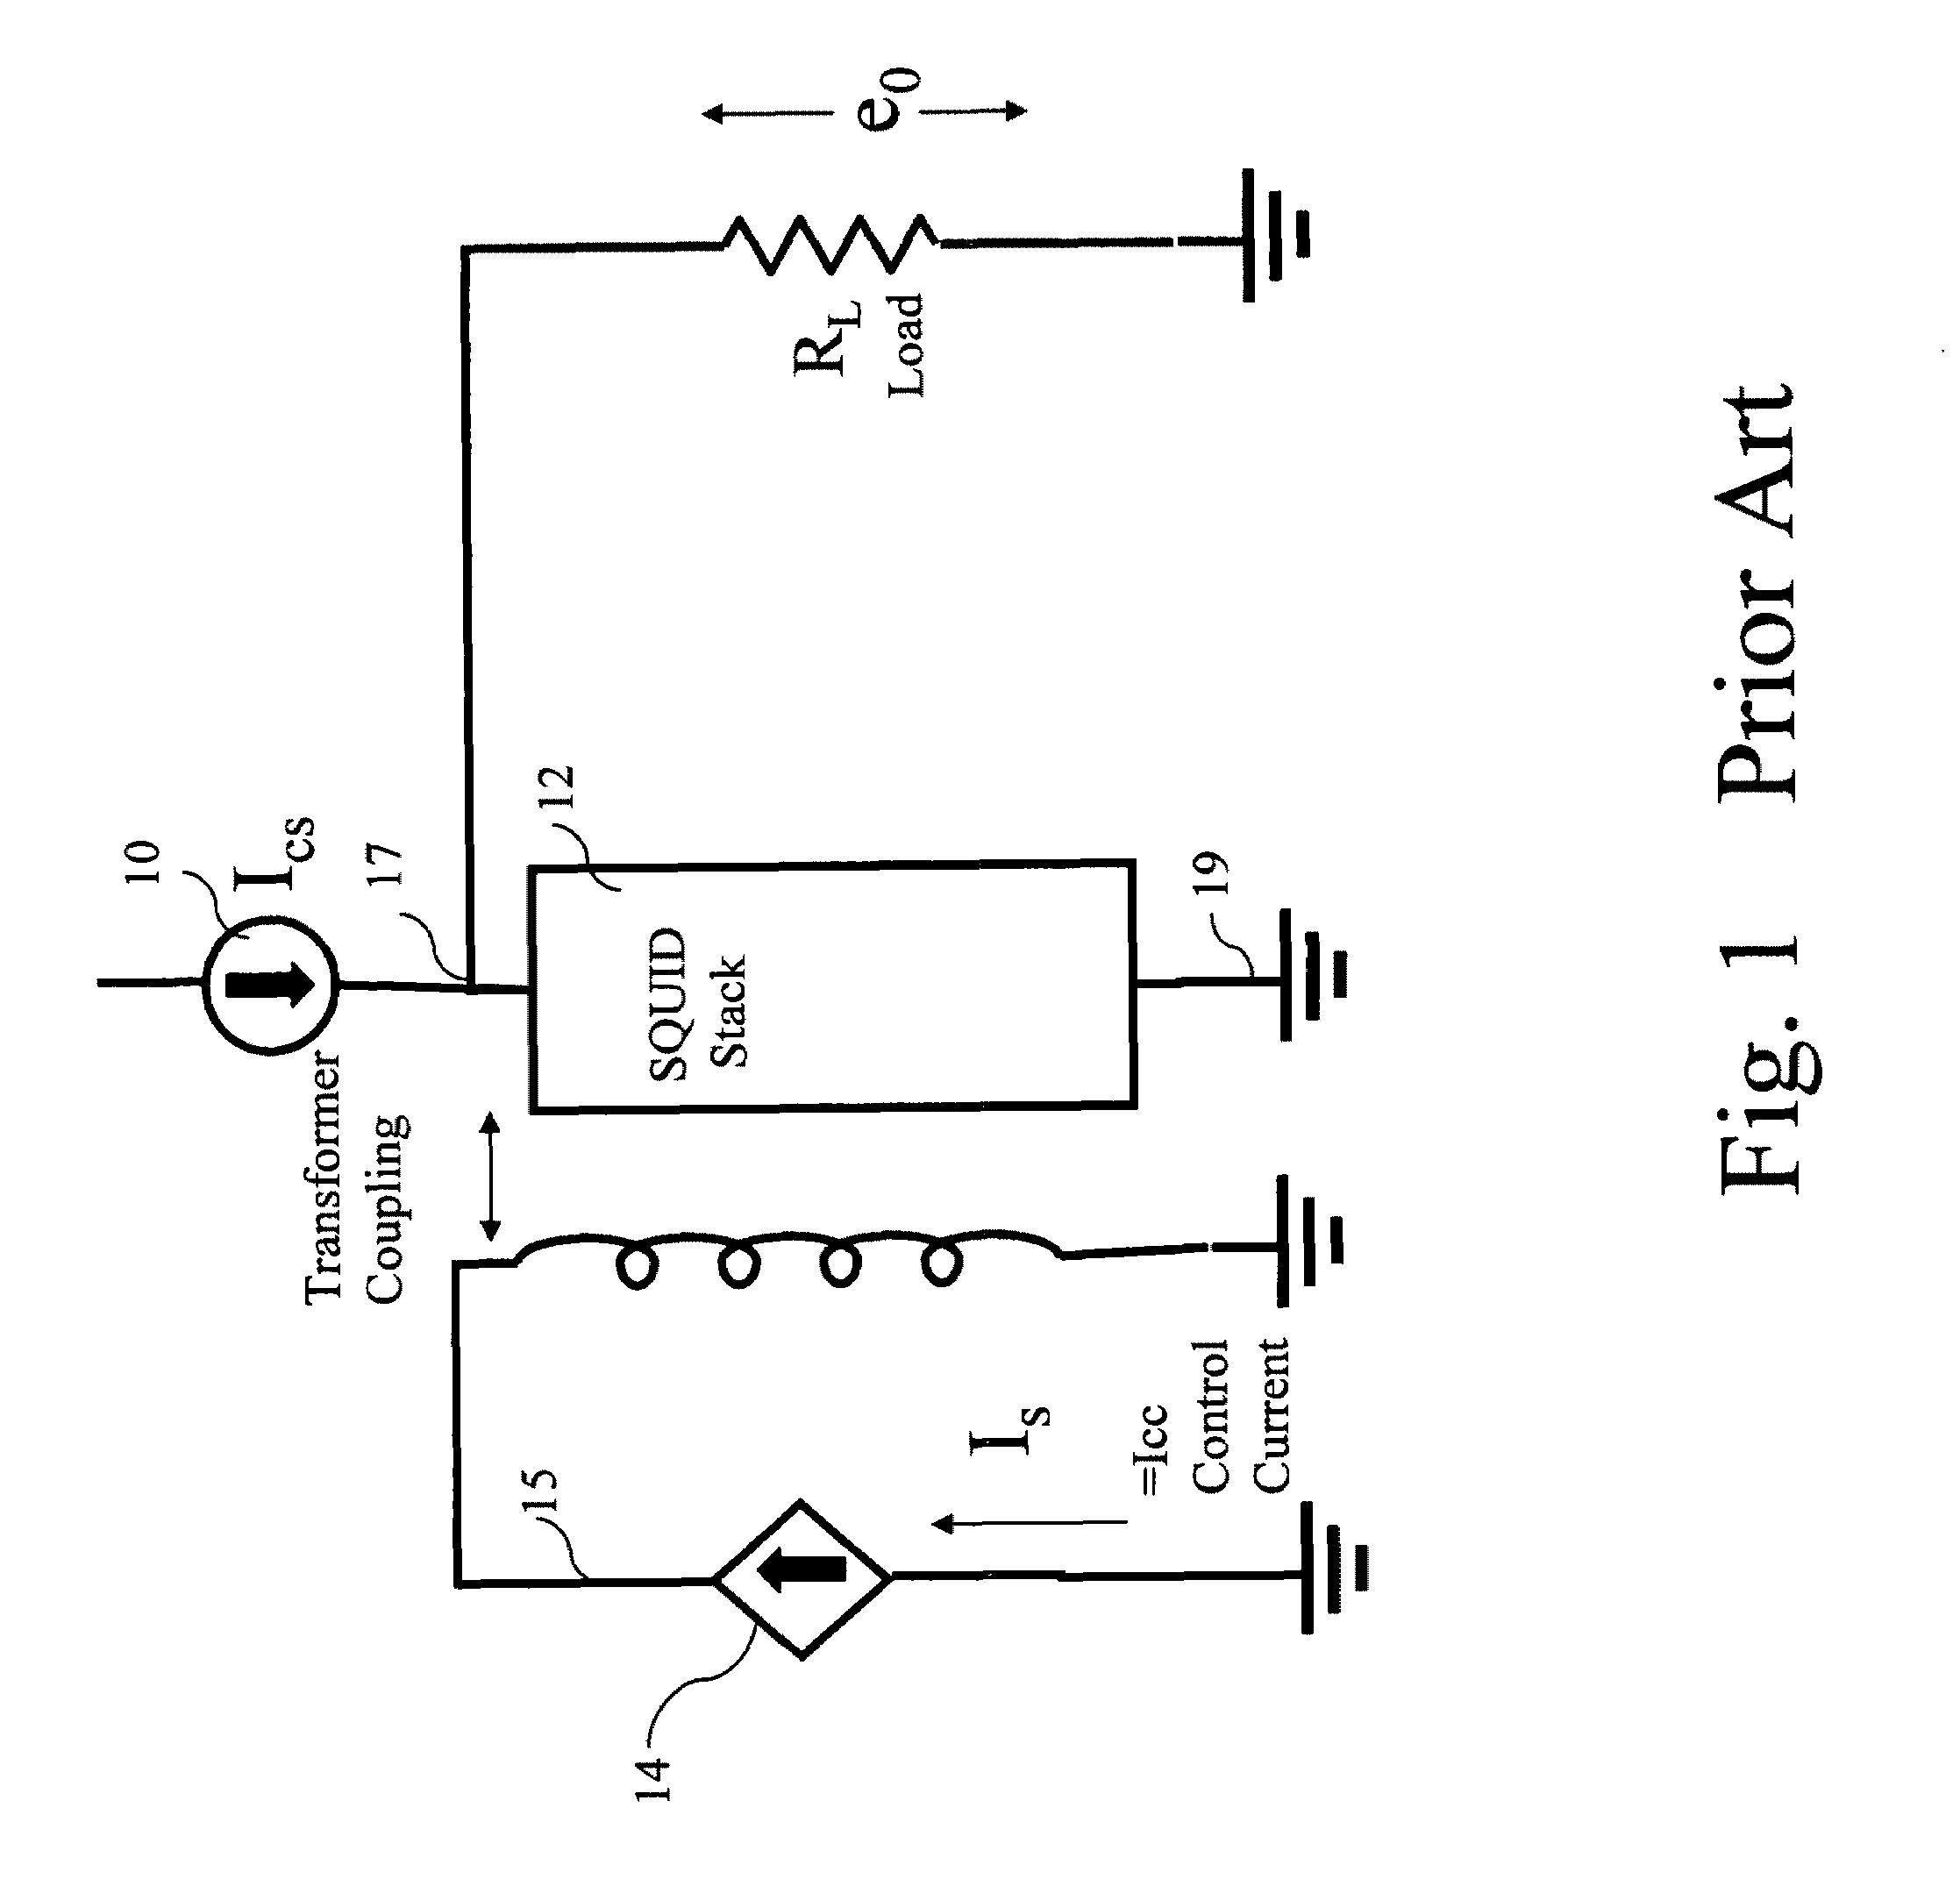 Superconducting switching amplifier